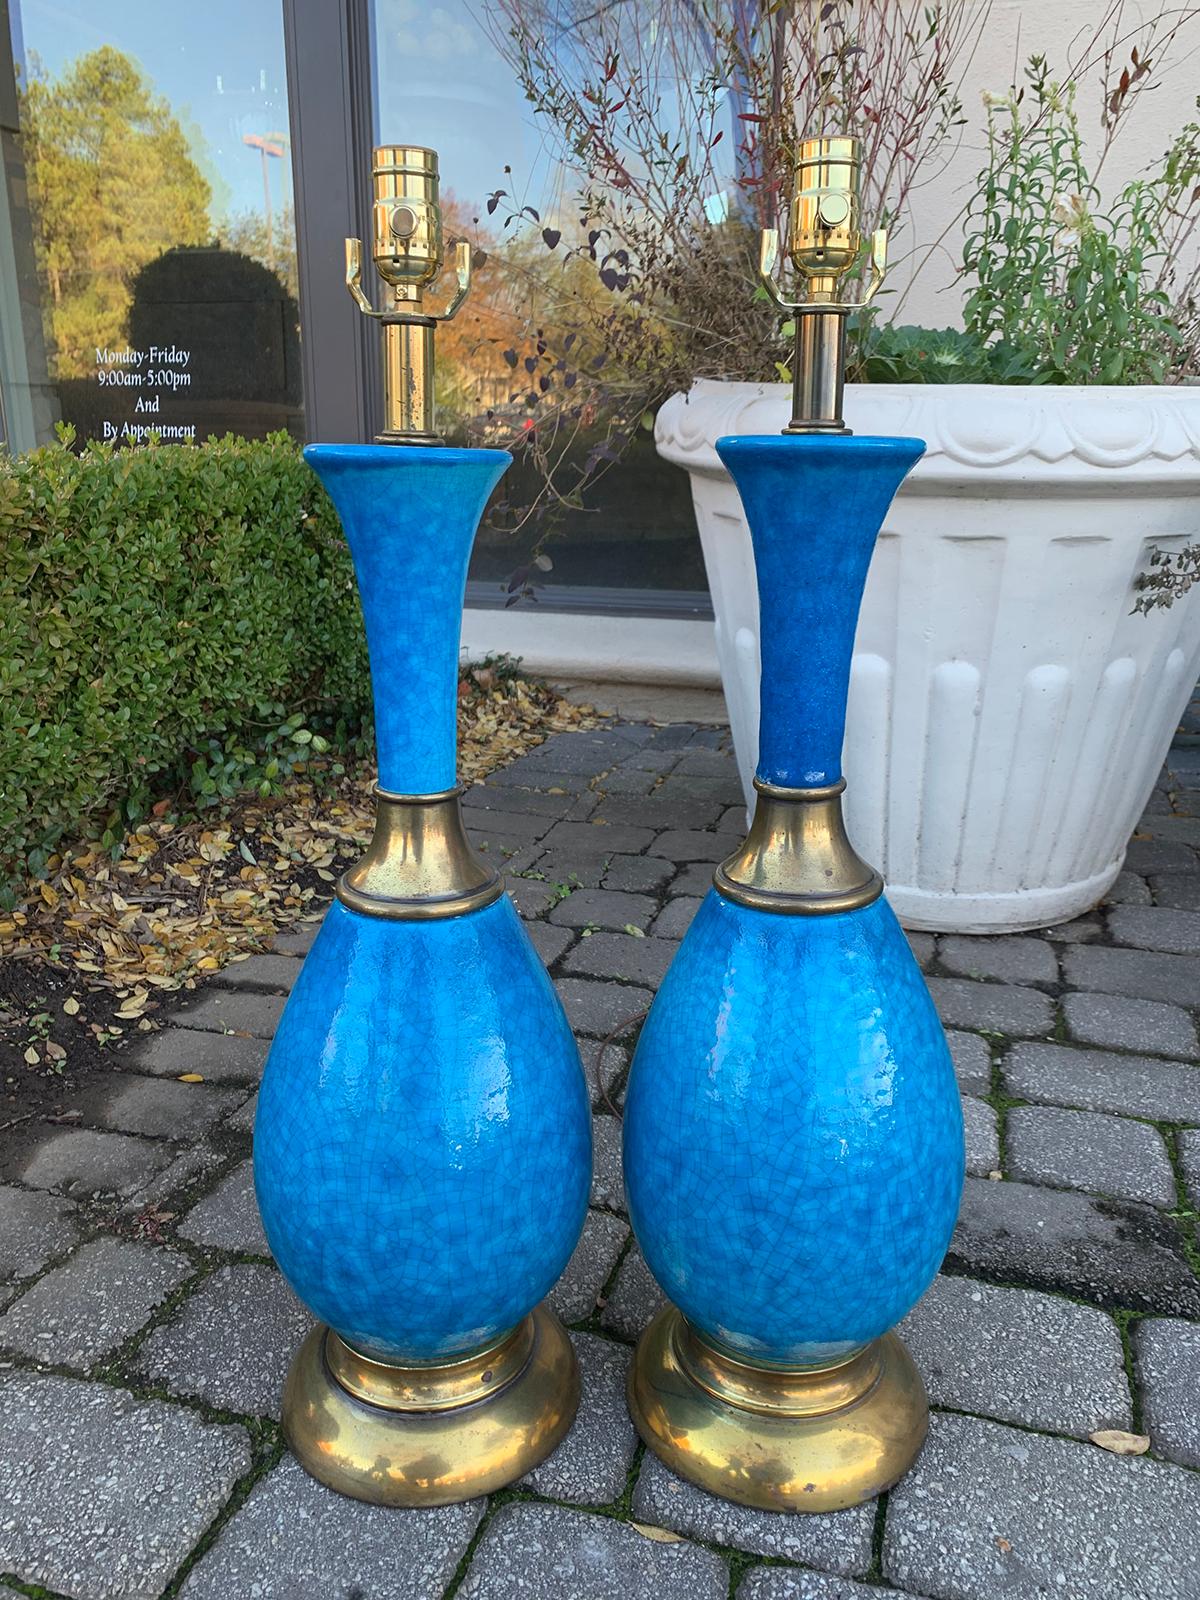 Pair of mid-20th century brass-mounted blue pottery lamps
Brand new wiring.